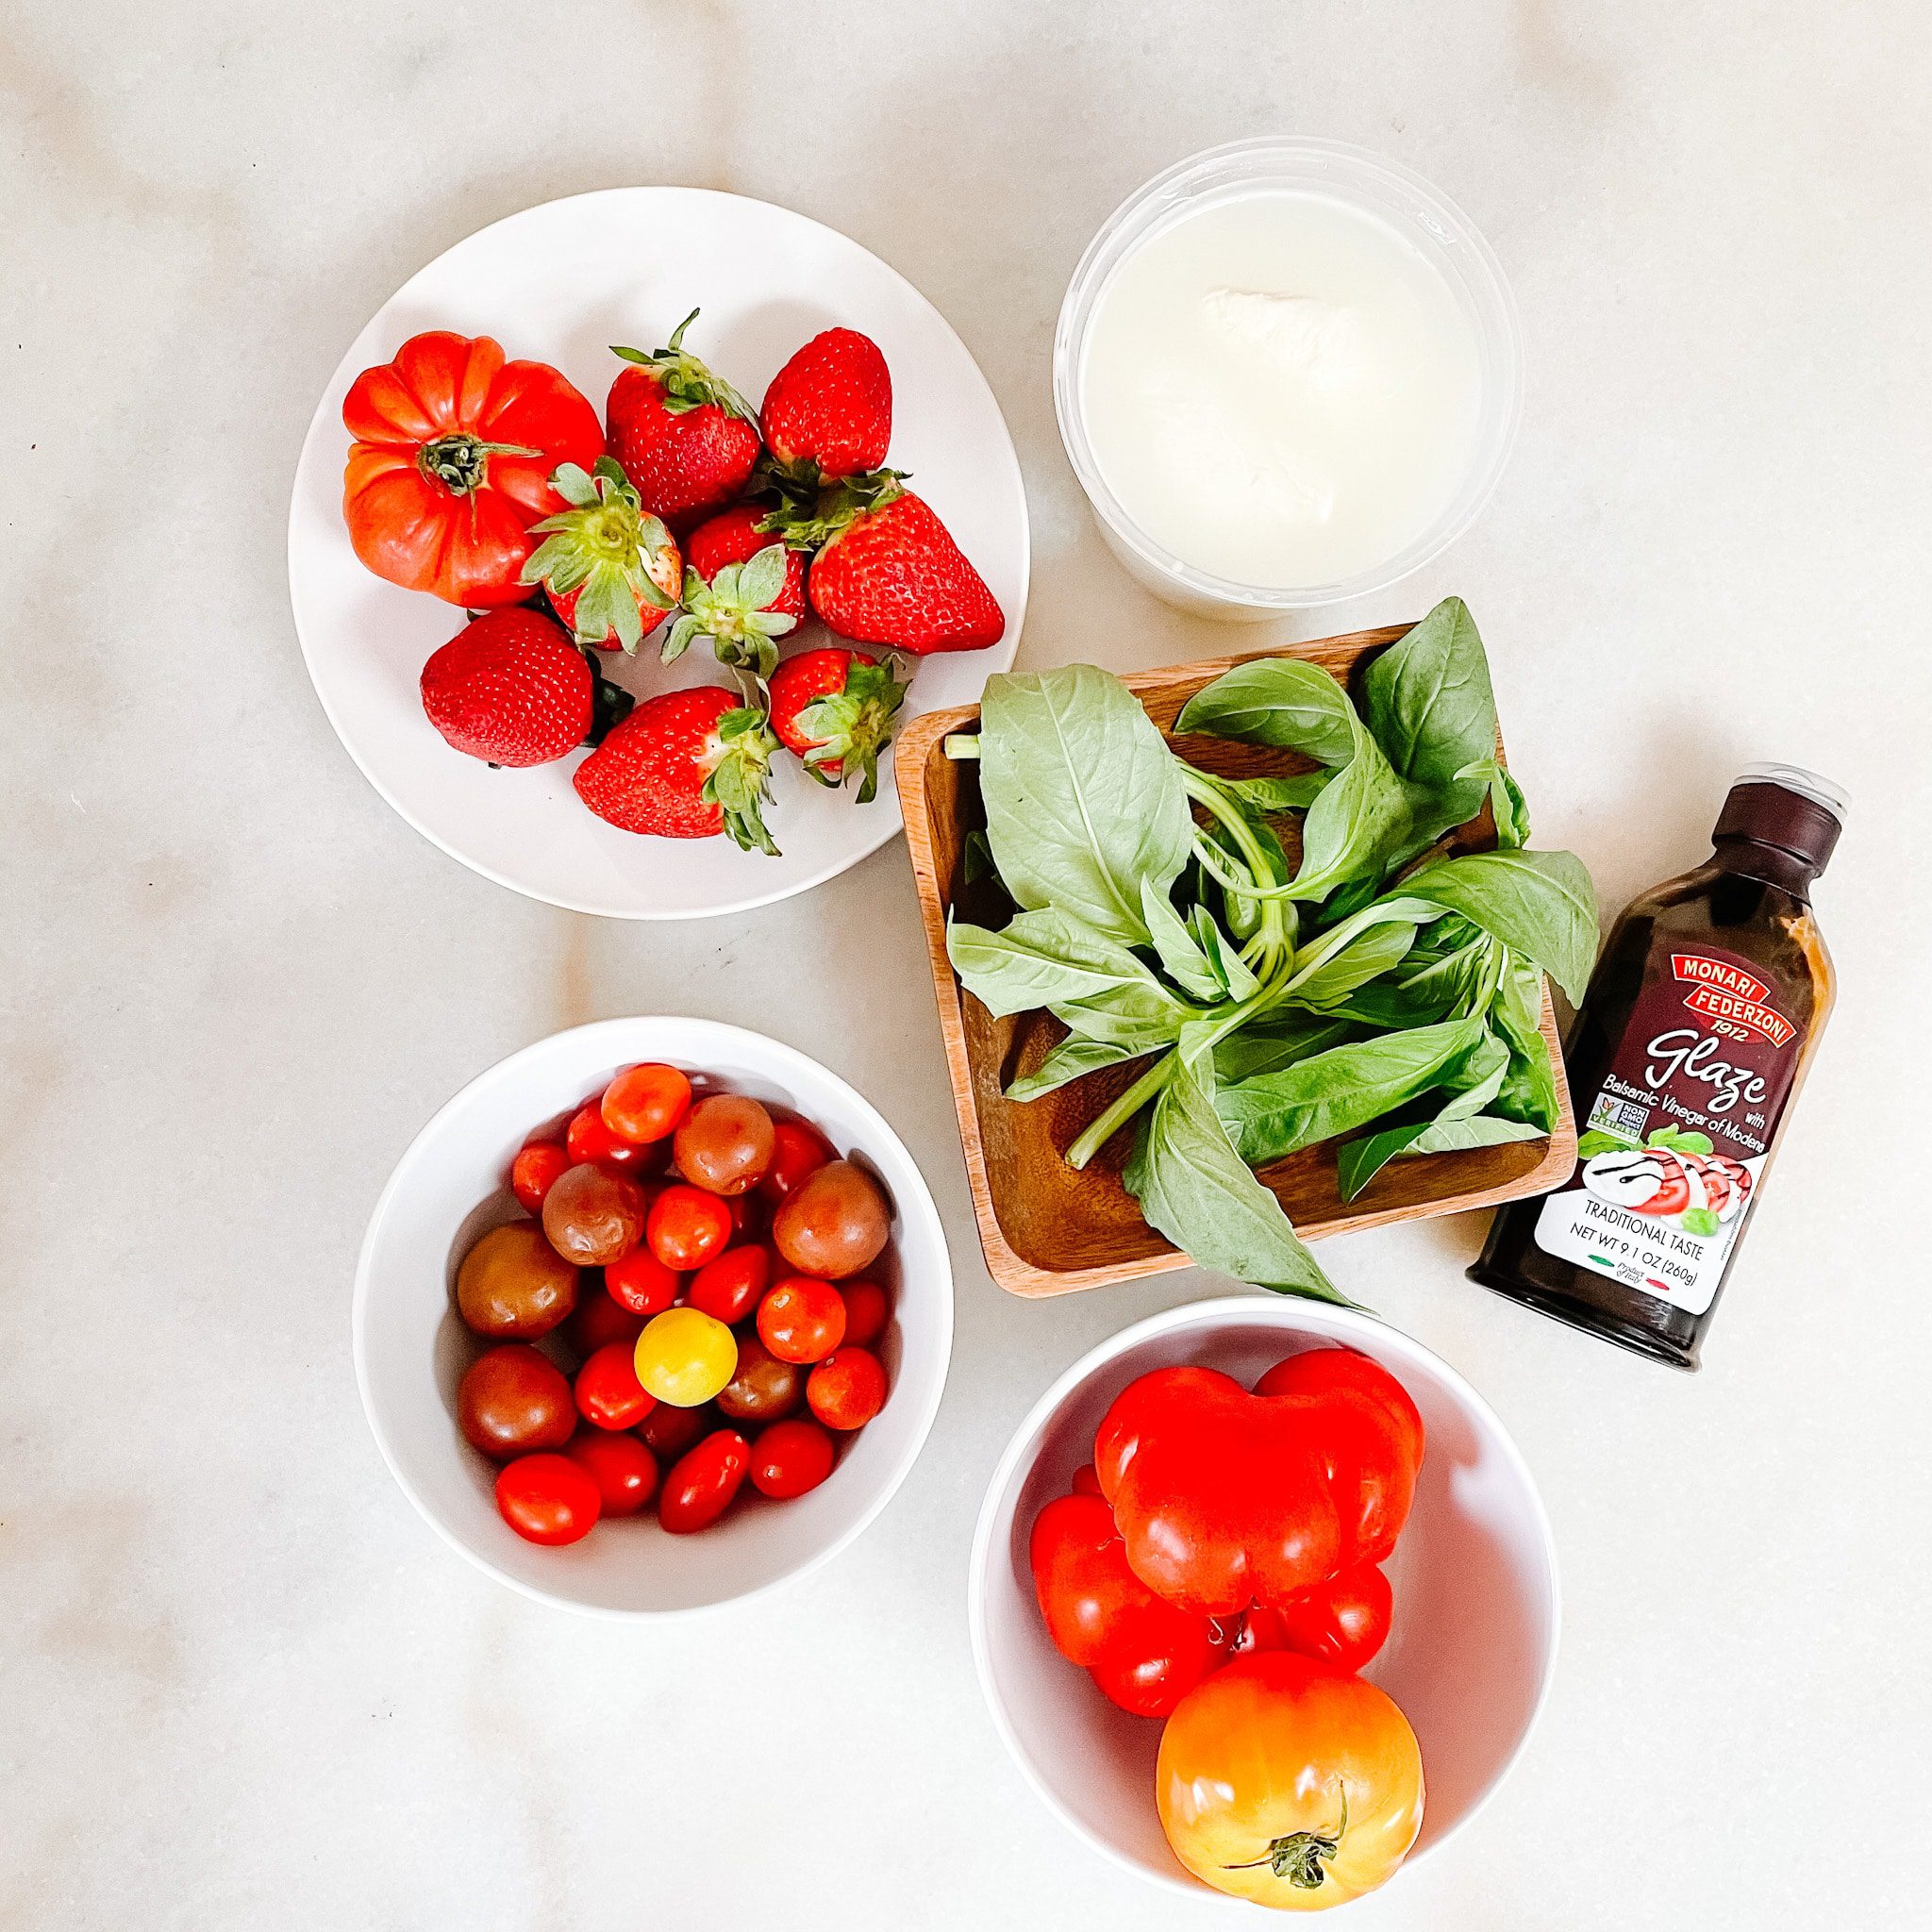 What's for dinner? strawberry salad ingredients | easy weeknight dinner recipes via Yellow Brick Home